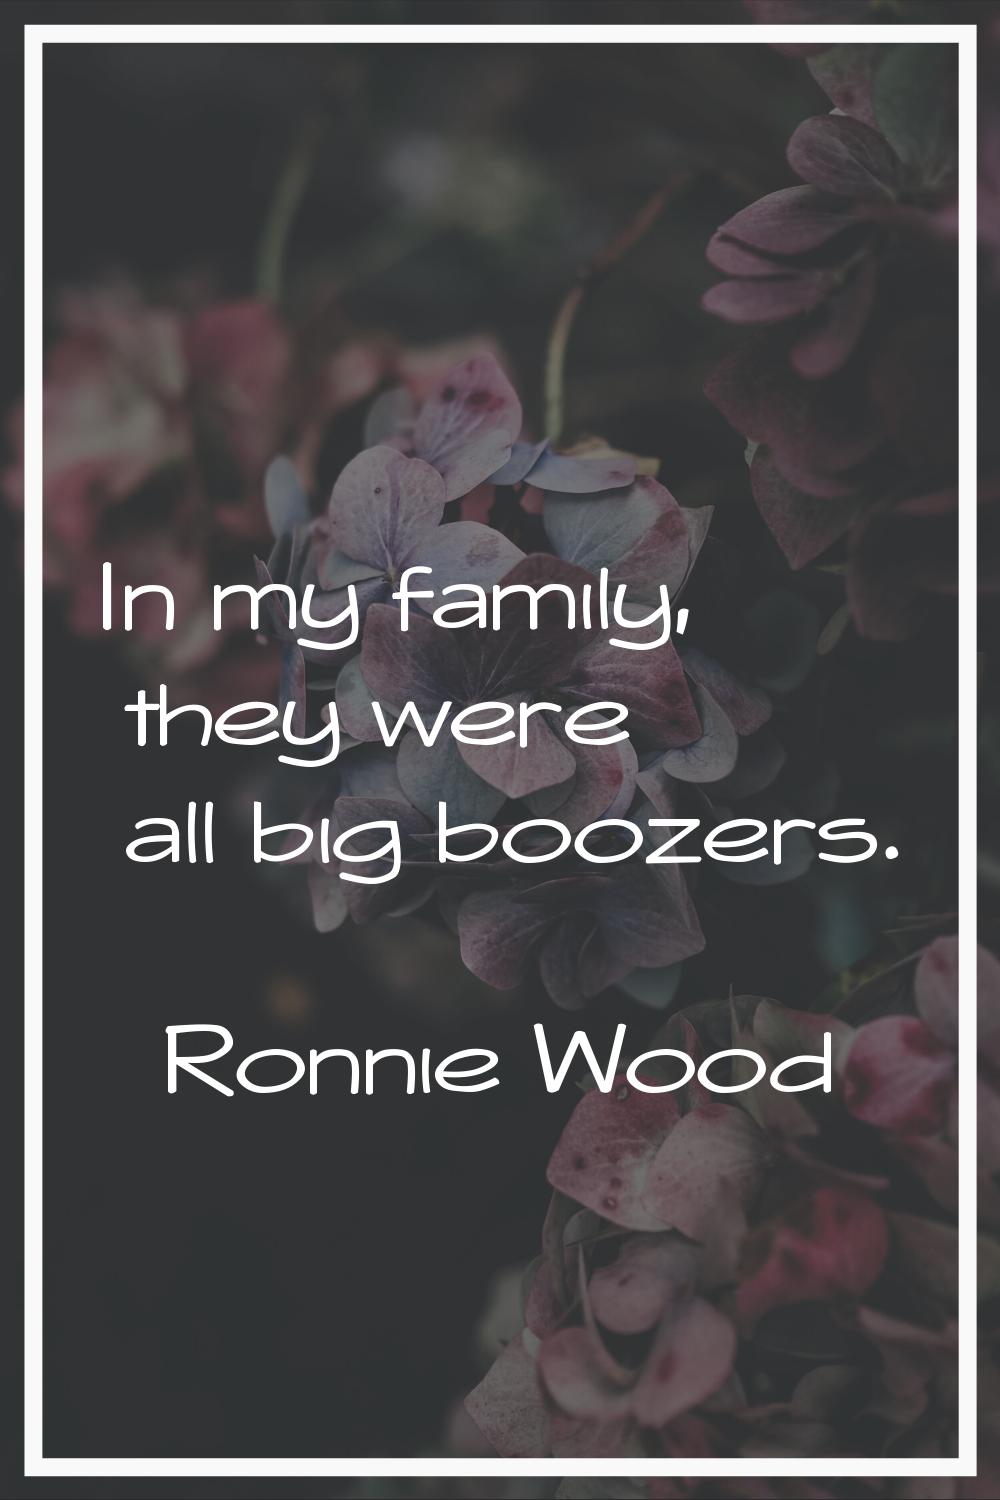 In my family, they were all big boozers.